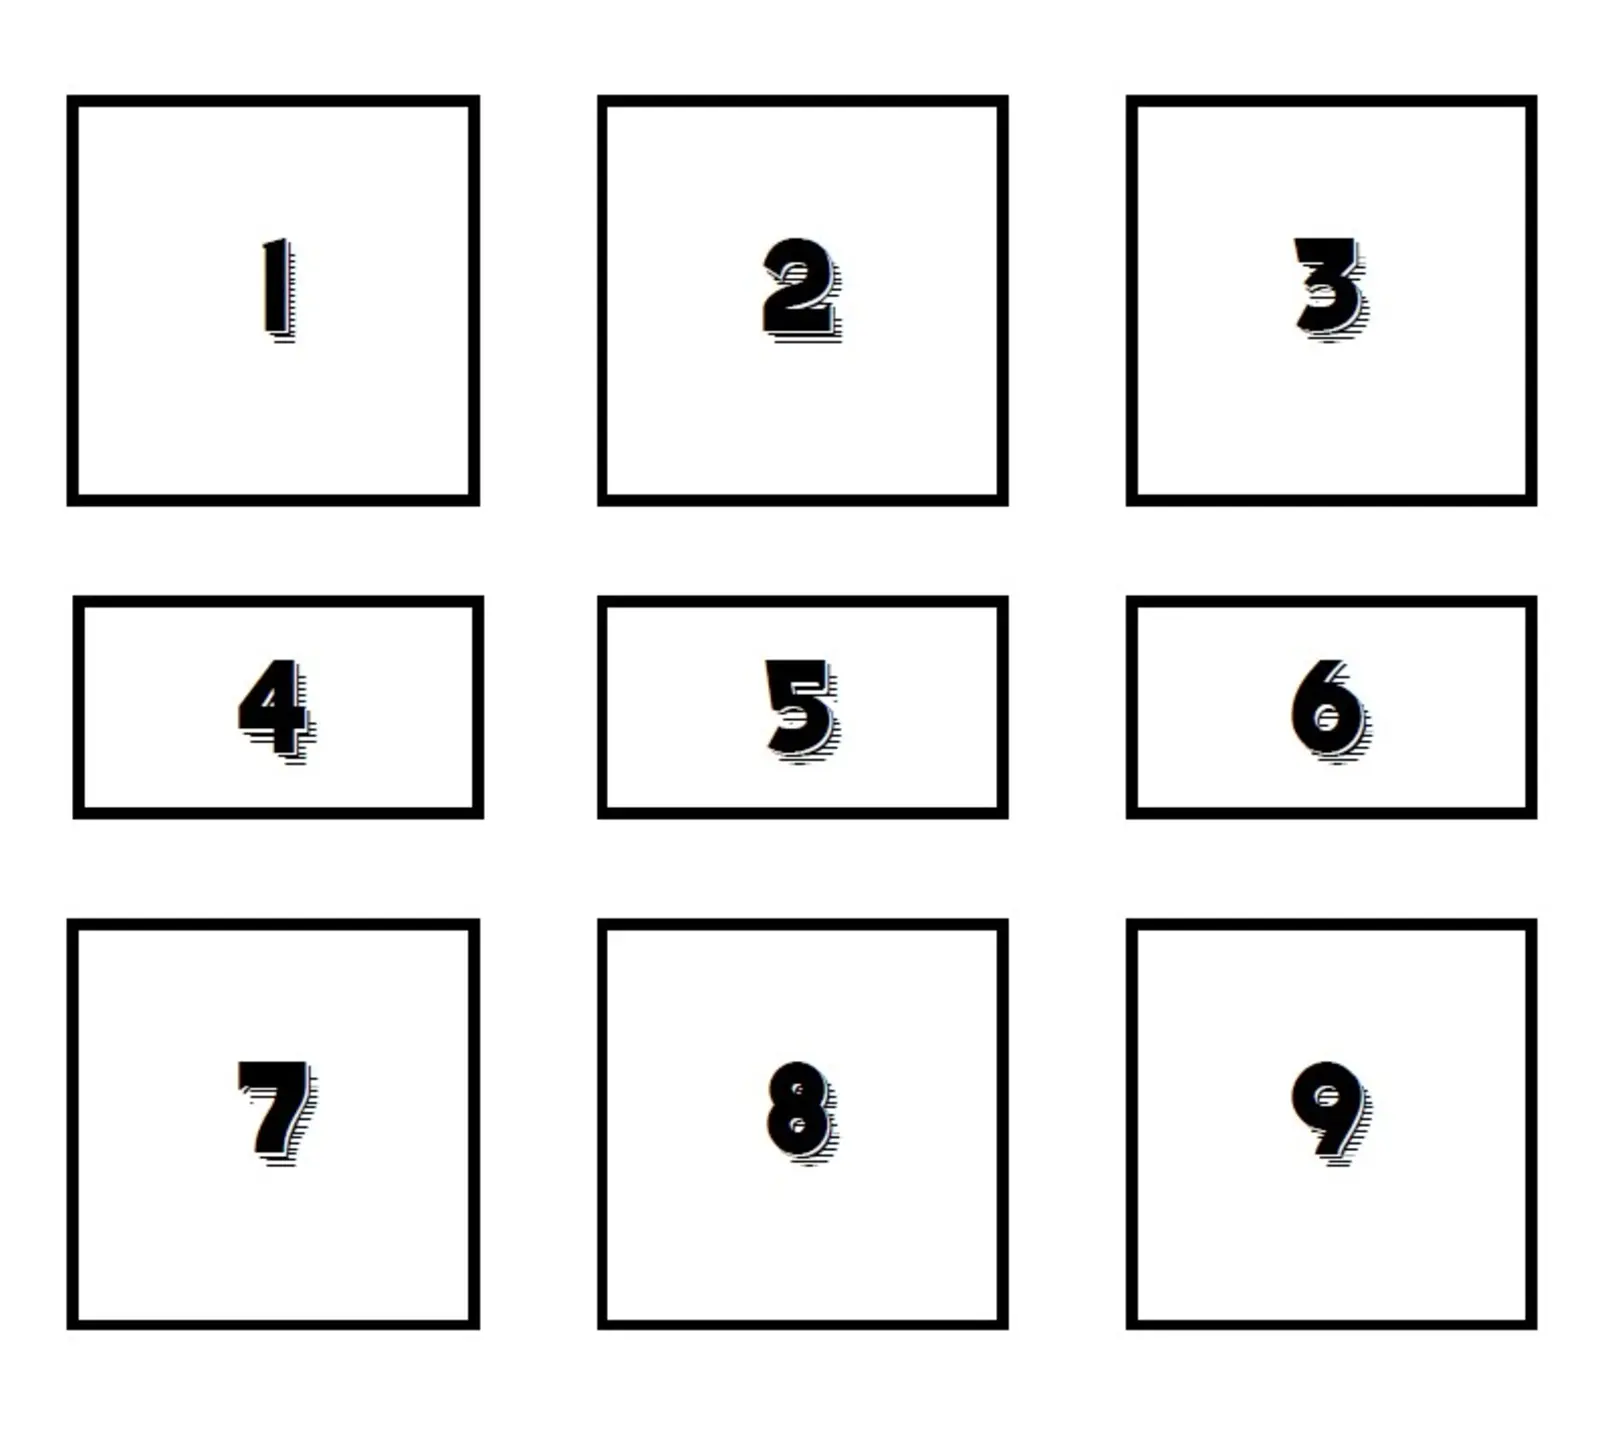 Nine box square grid numbered 1 through 9, with three numbers per row.